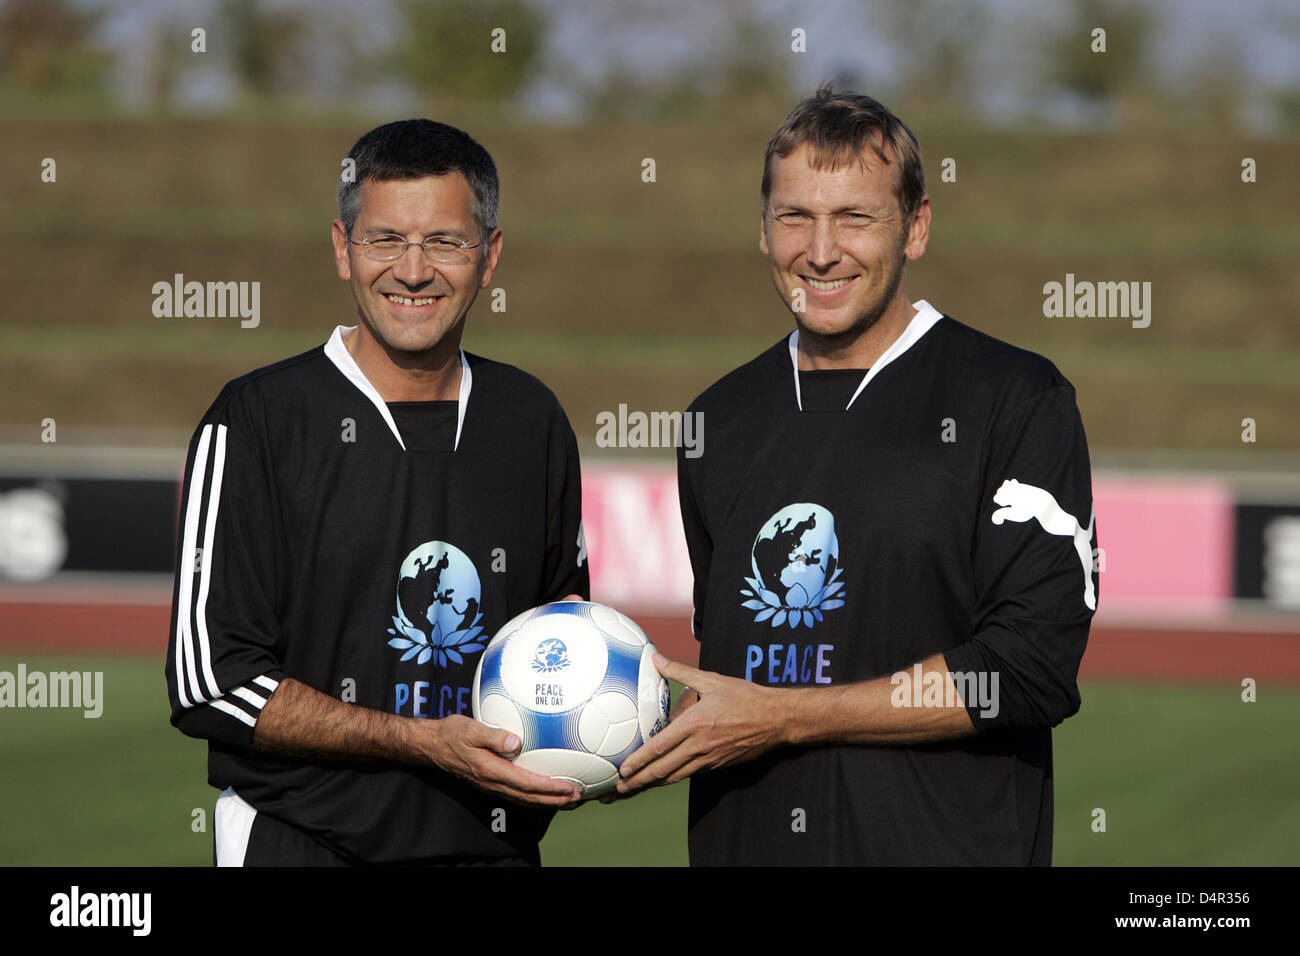 Adidas CEO, Herbert Hainer (L), and Puma CEO, Jochen Zeitz, on the pitch  ahead of a soccer friendly between two company sides in Herzogenaurach,  Germany, 21 September 2009. The friendly took place